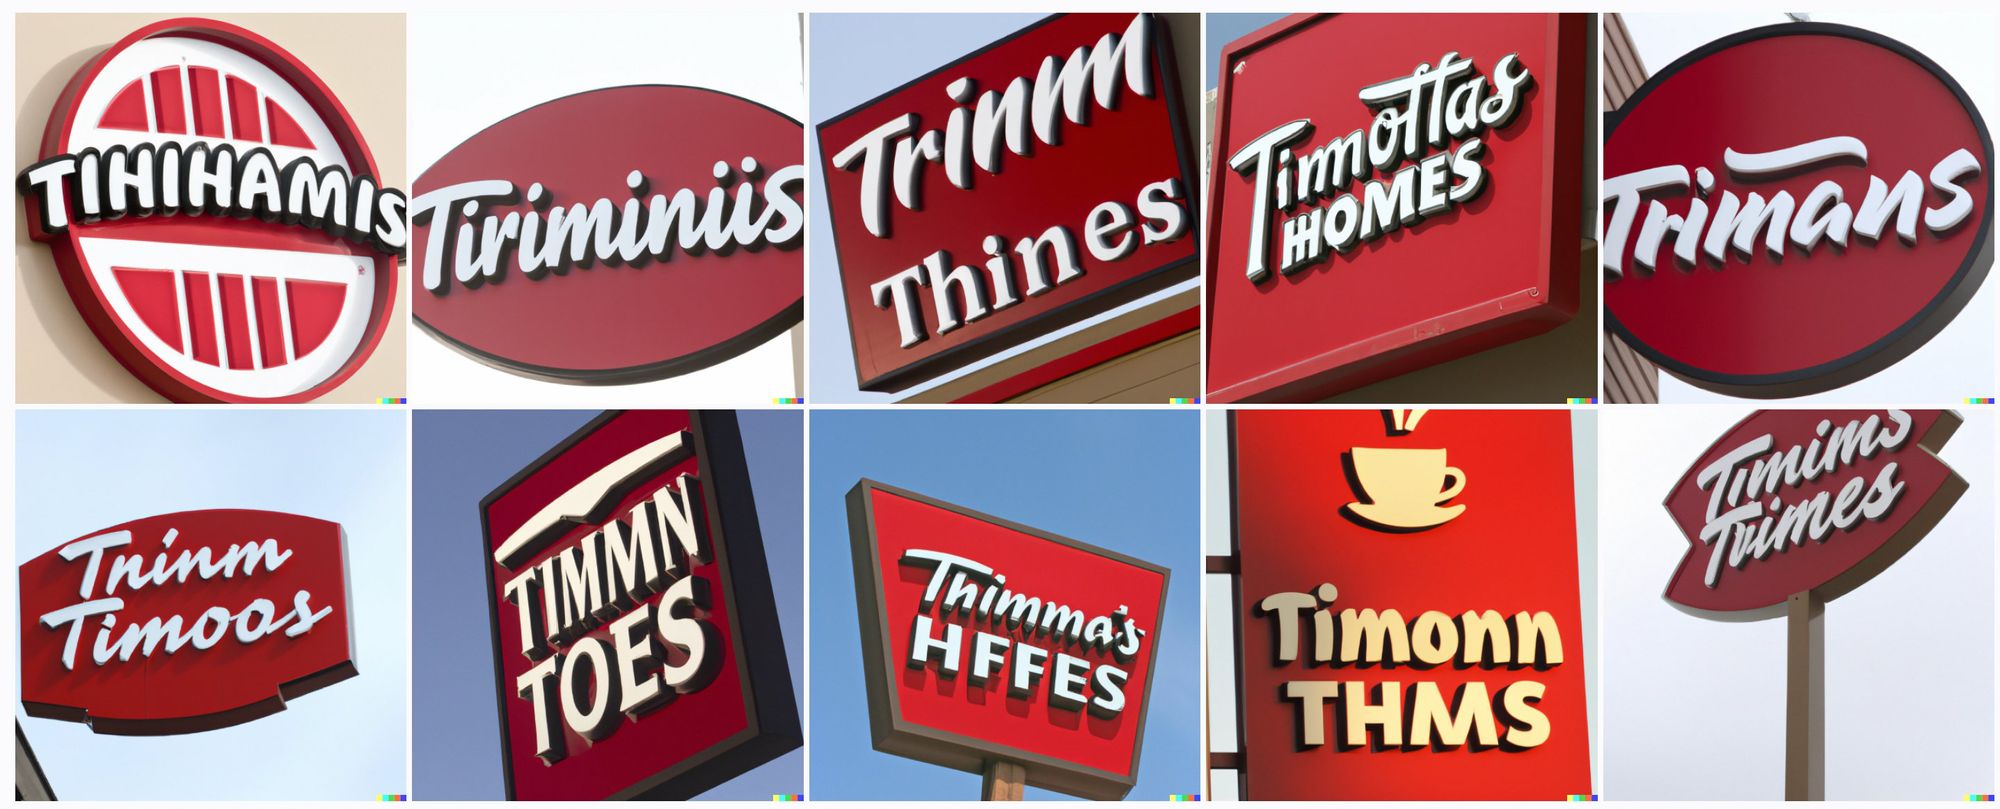 White script on red signs, of various shapes. One has a coffee cup. The words read something like "Tihihamis" and "Trinmm Thines" and "Thimma's HFFES" and "Tninm Timoos" and "Timmn Toes"